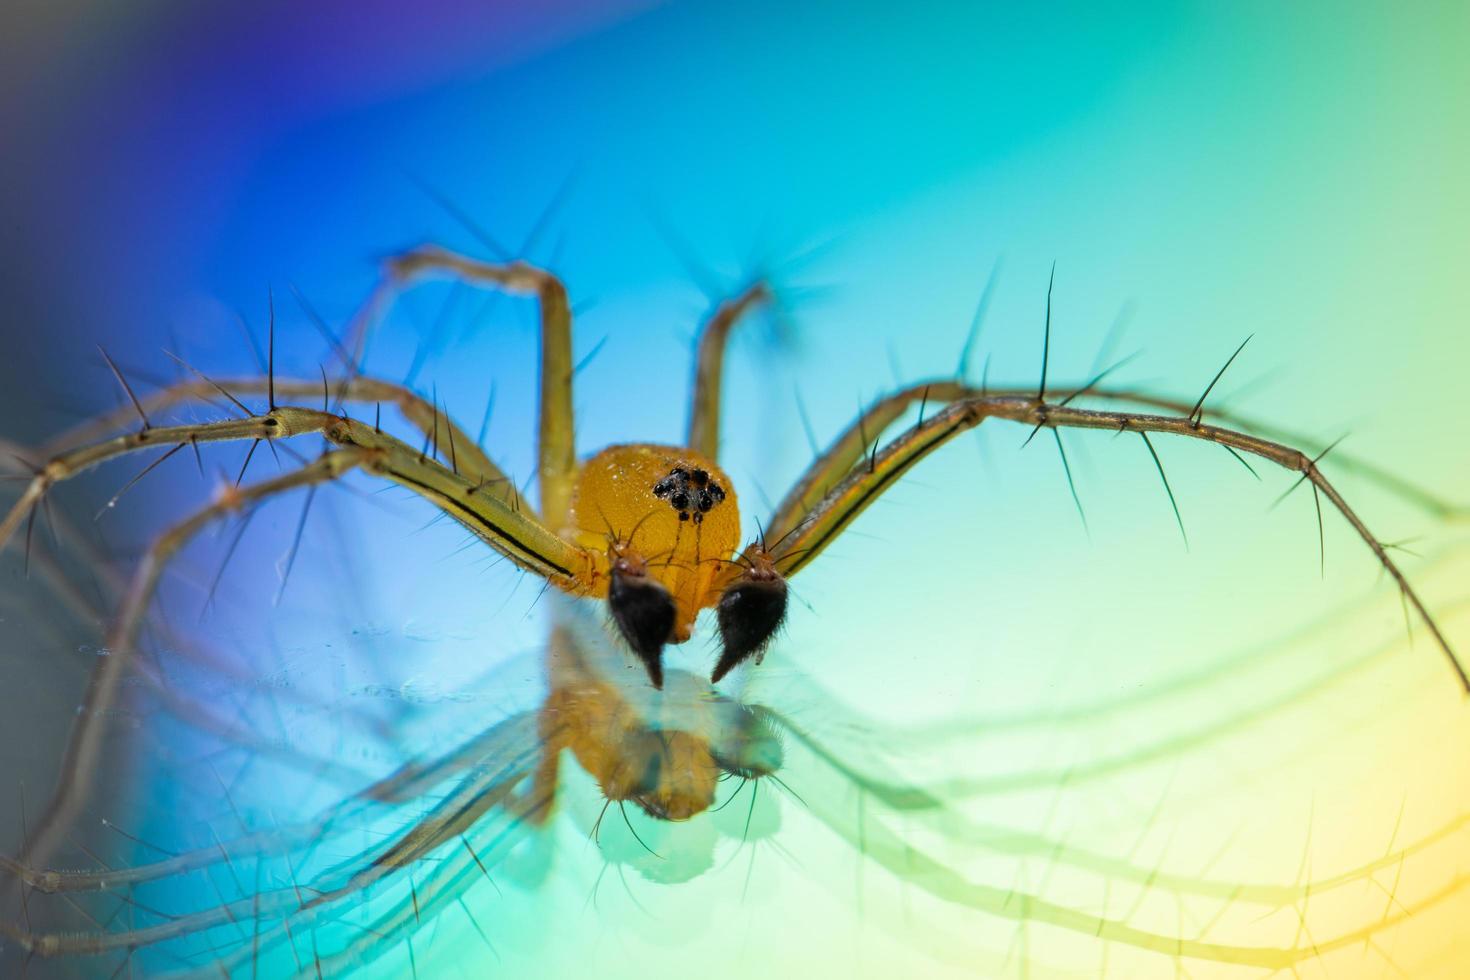 Spider on a reflecting background photo